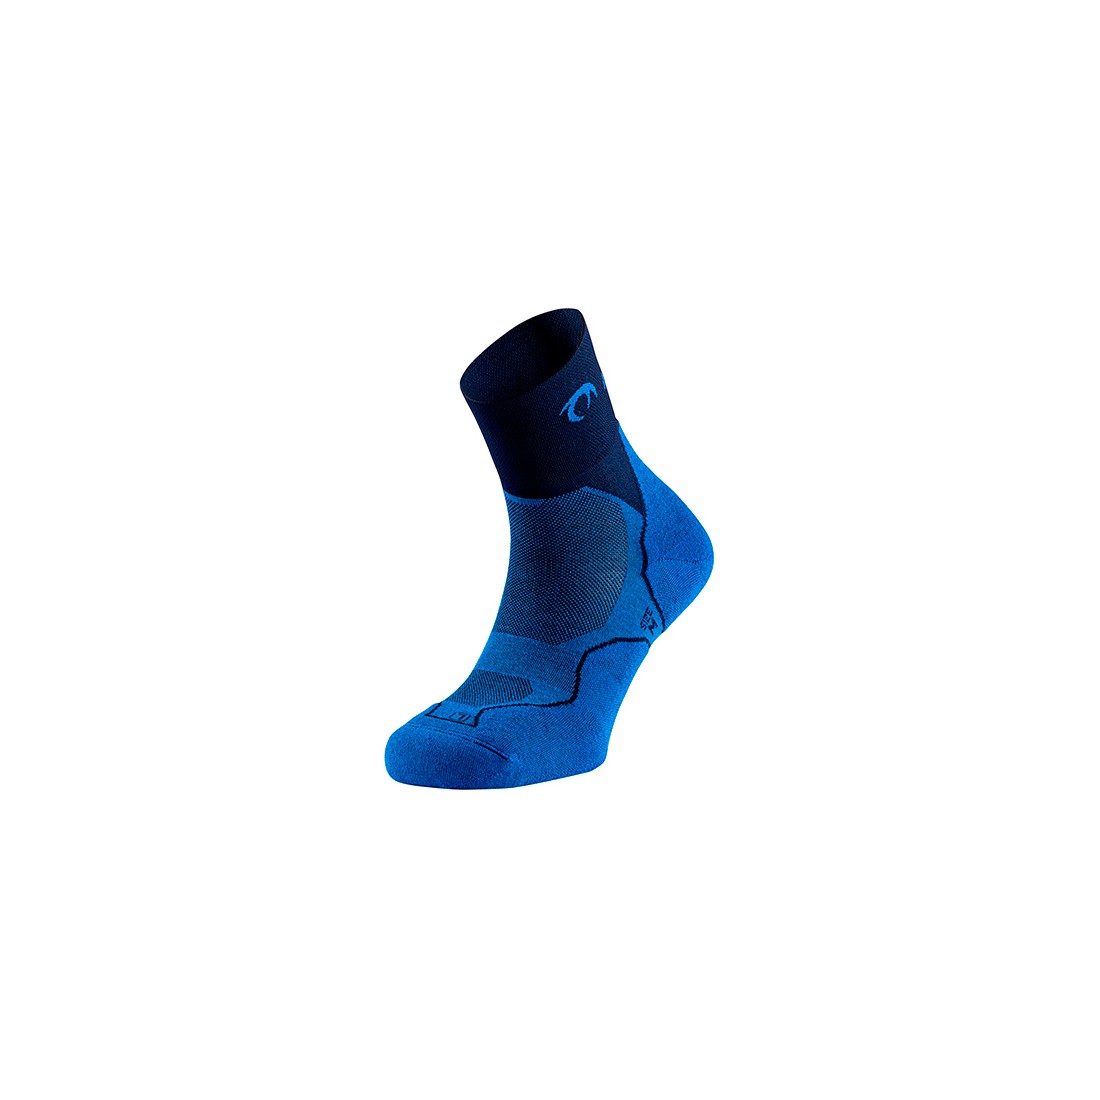 Calcetines Lorpen Trail Running T3 Eco Negro Mujer